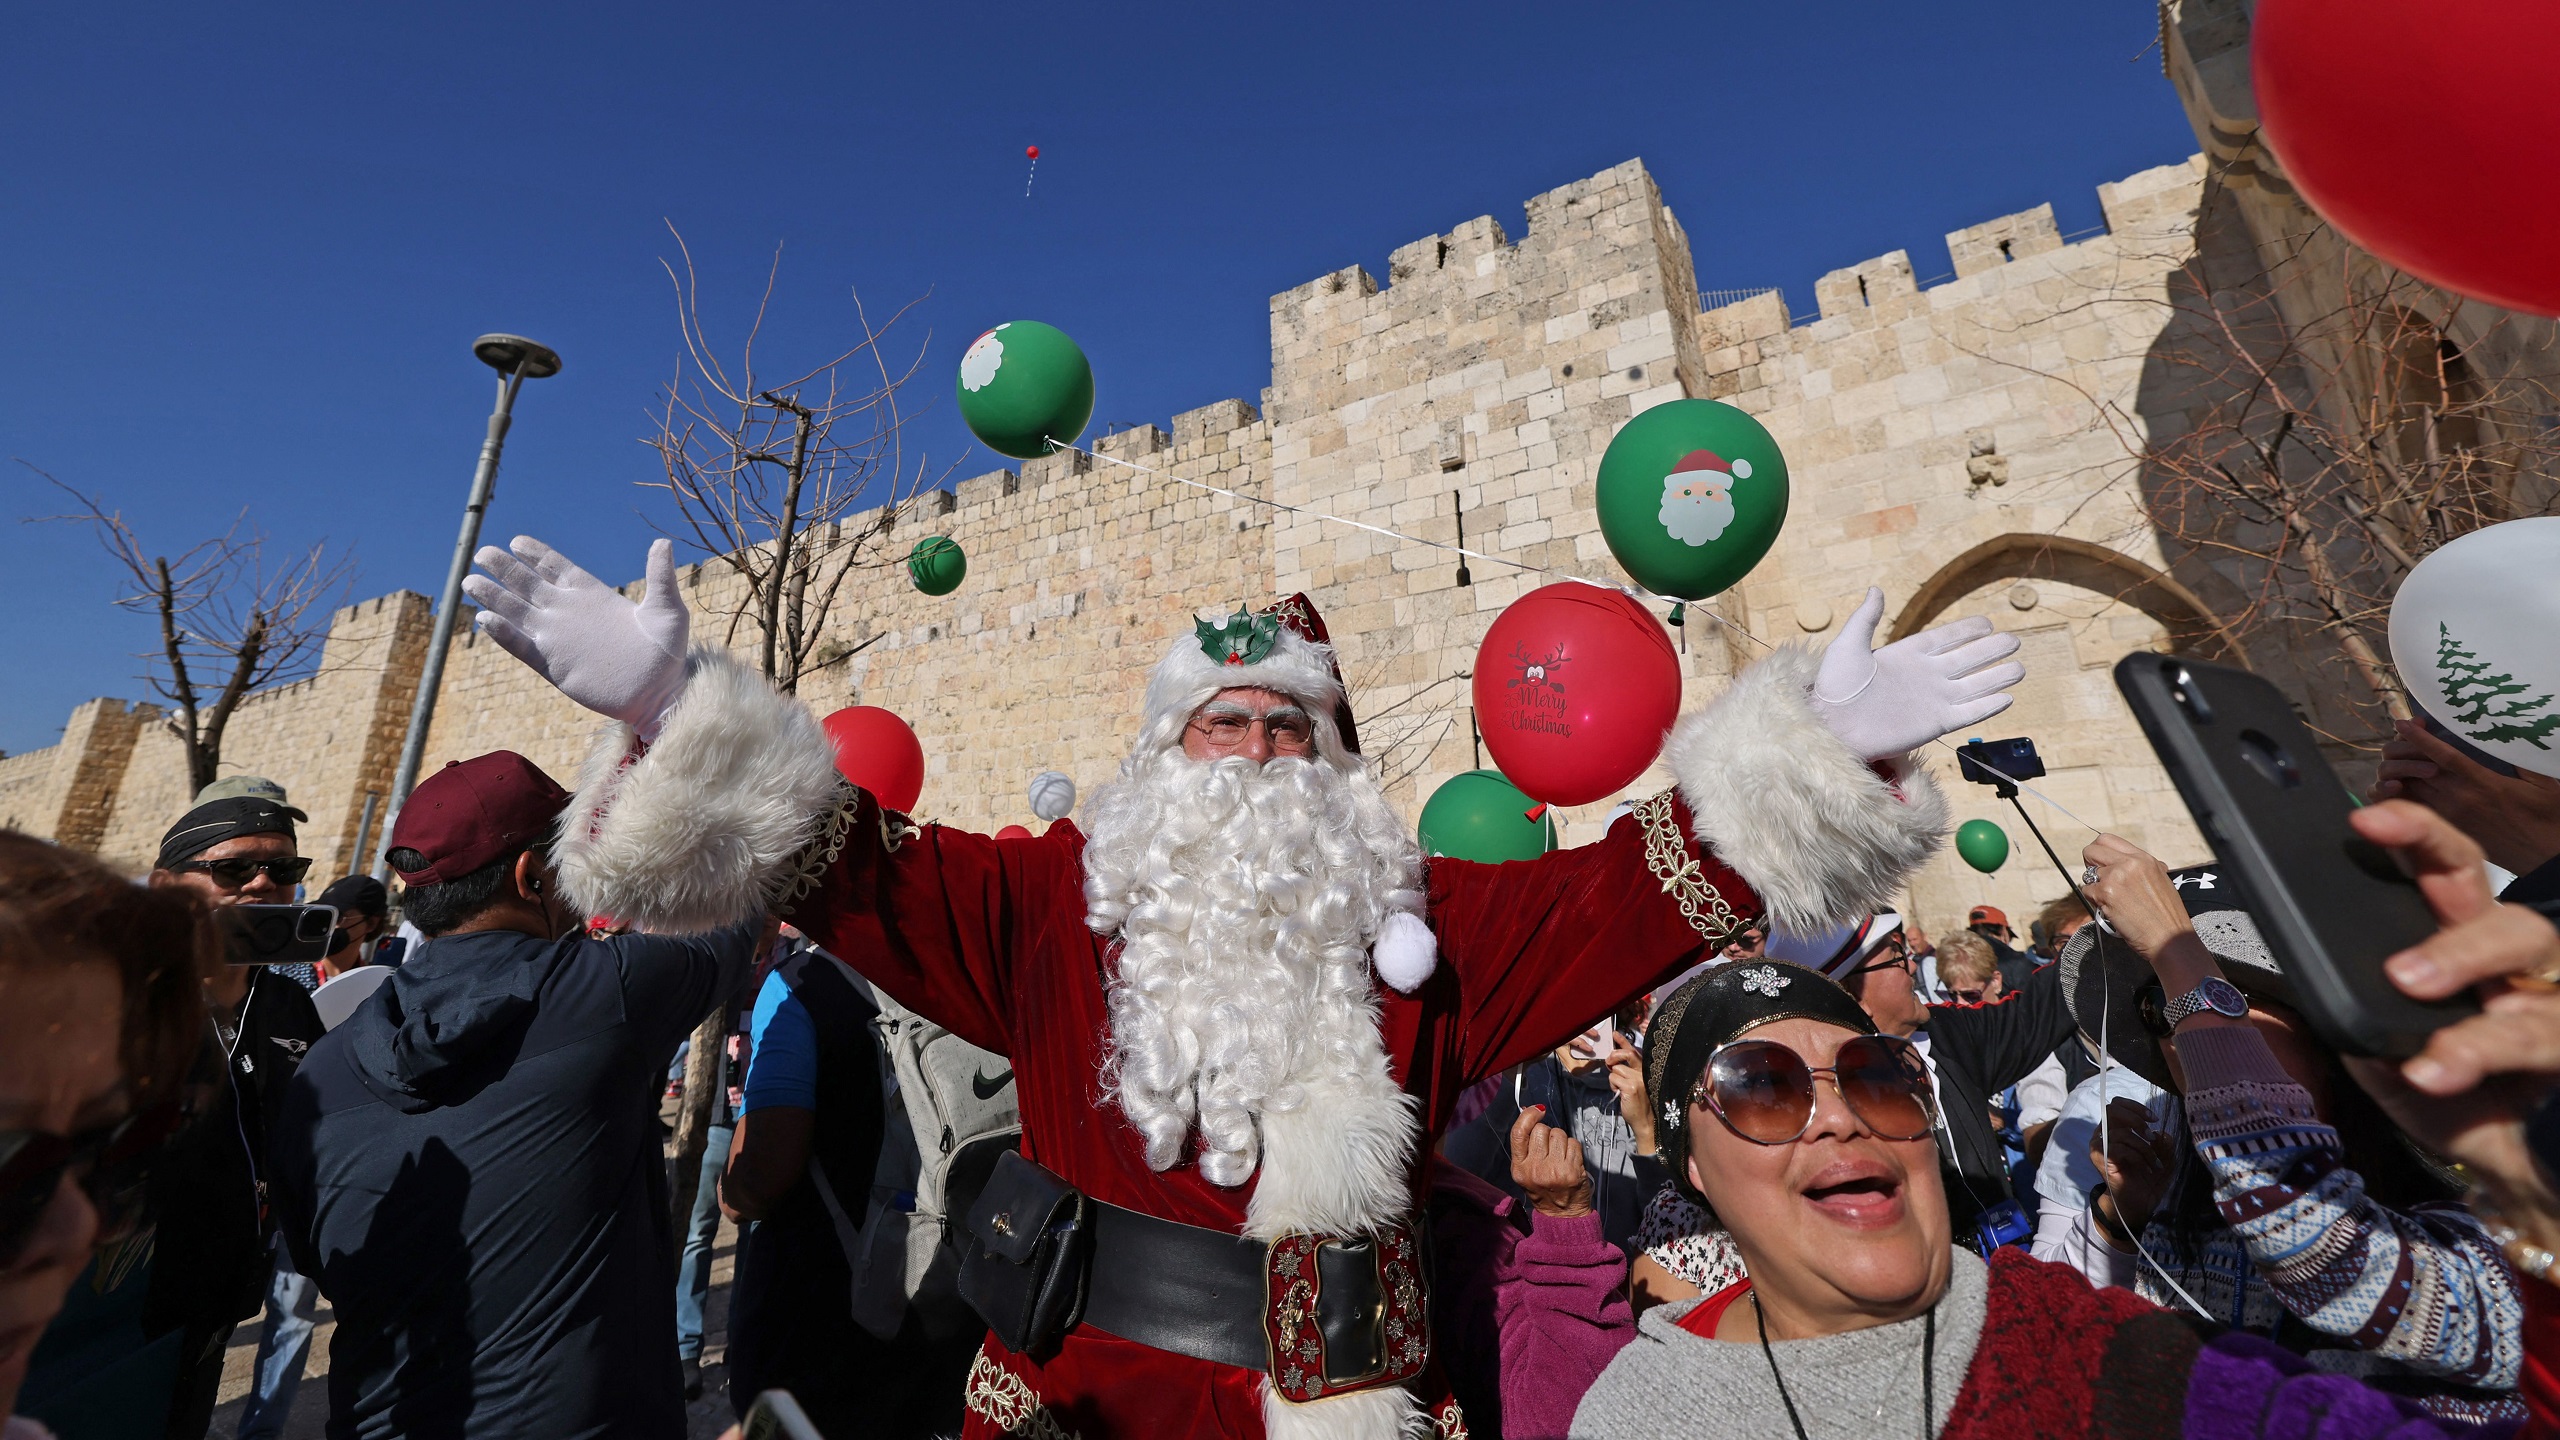 Christian Tourism to Holy Land Slowly Recovers Ahead of Christmas